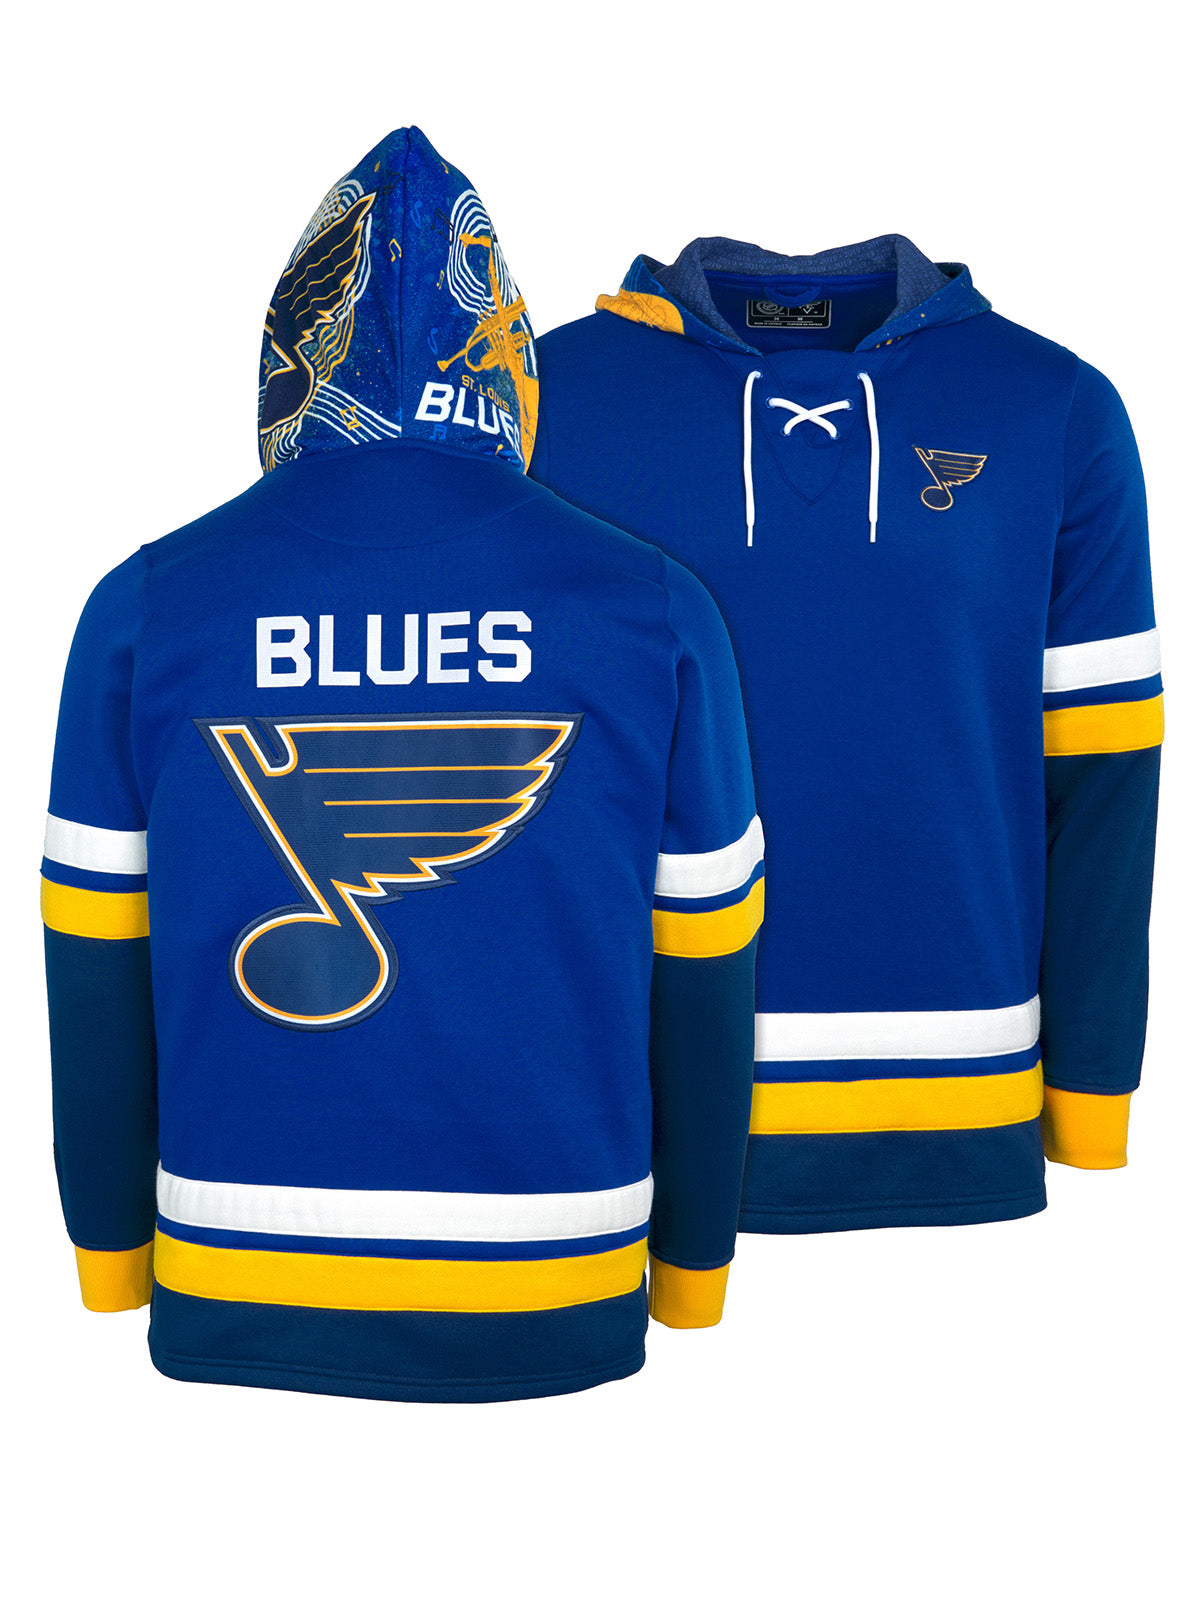 St. Louis Blues Lace-Up Hoodie - Hand drawn custom hood designs with all the team colors and craftmanship to replicate the gameday jersey of this NHL hoodie